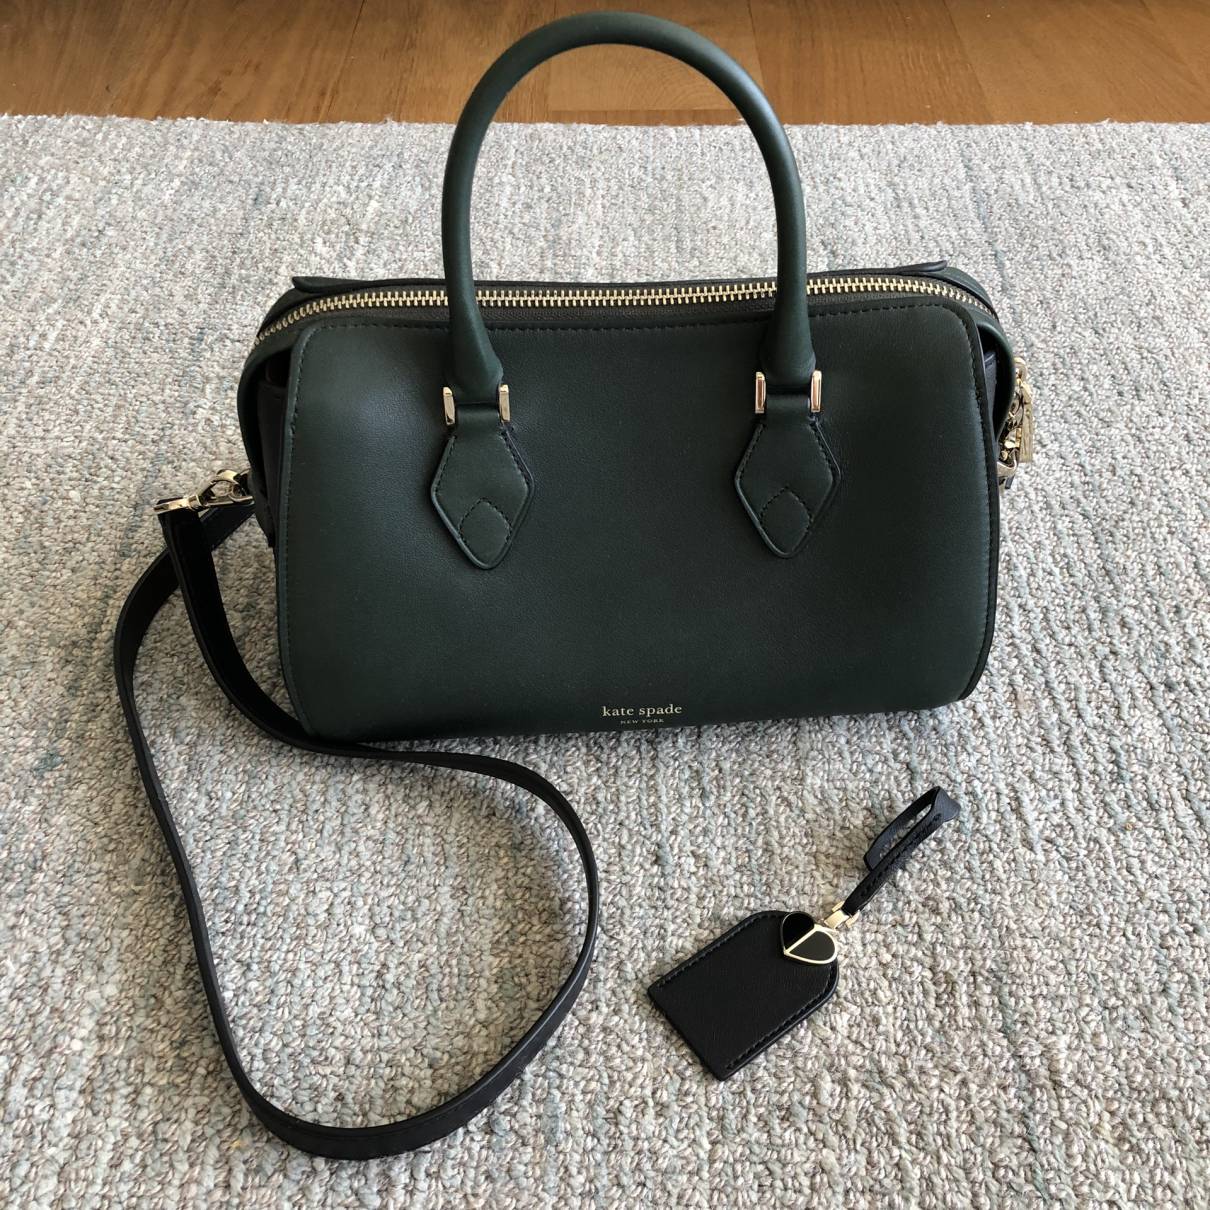 Leather bag charm Kate Spade Black in Leather - 25329805